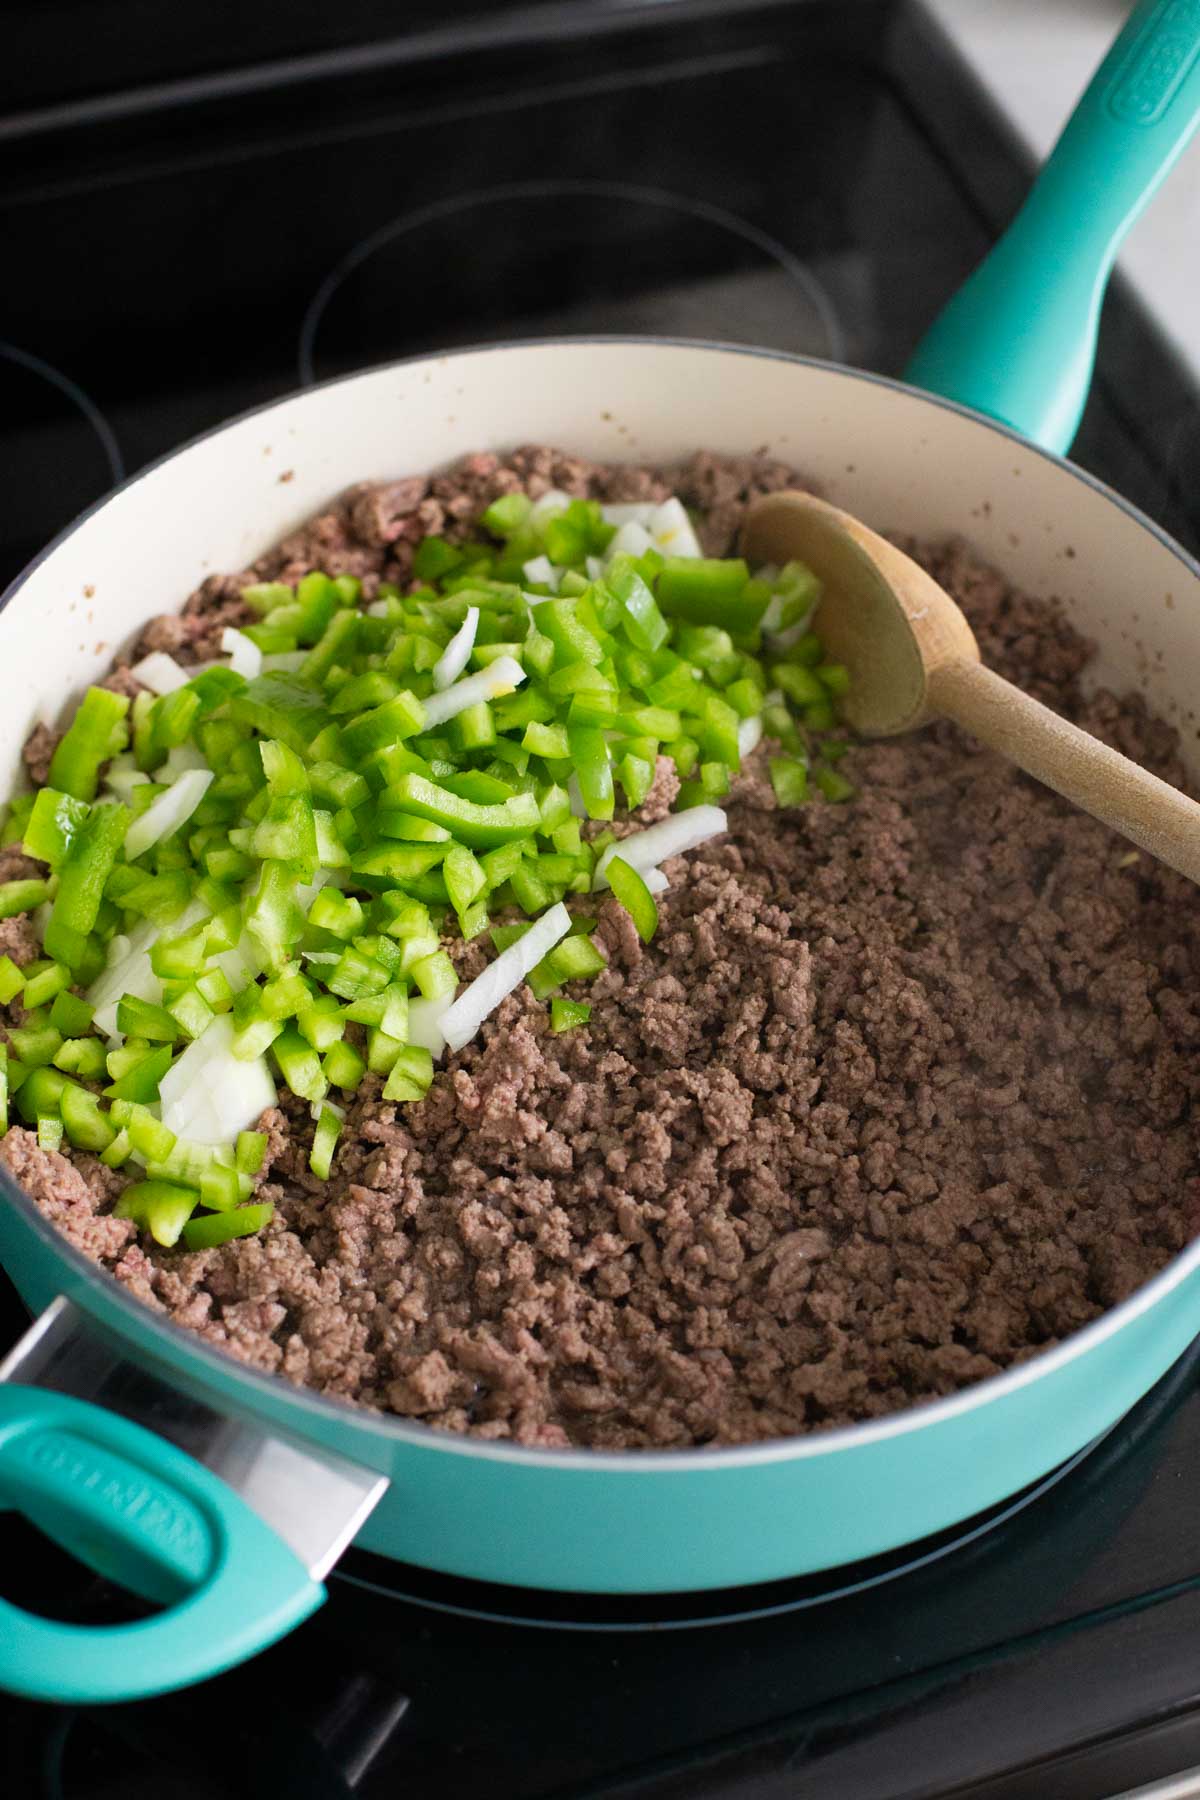 The ground beef and green peppers have been added to a large skillet to be cooked.